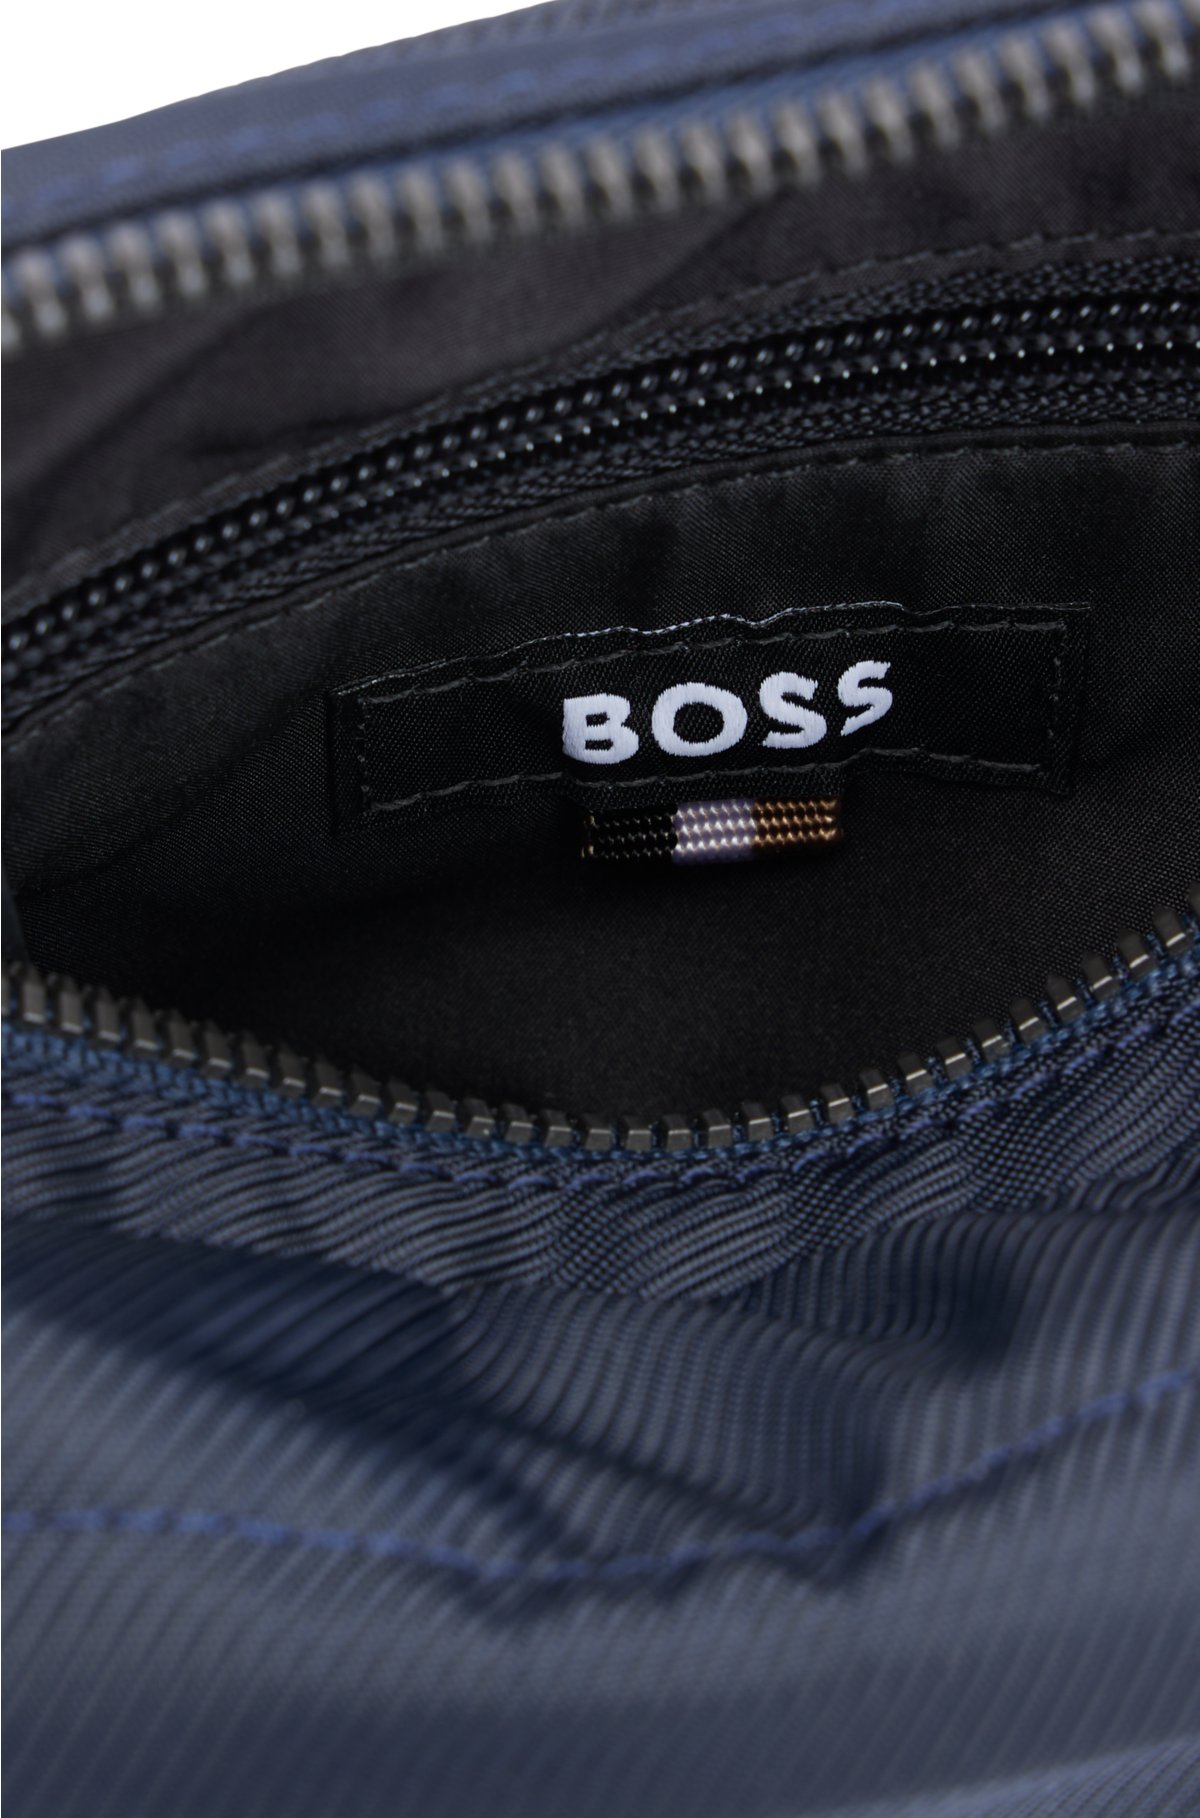 BOSS - Structured reporter bag with monogram detailing